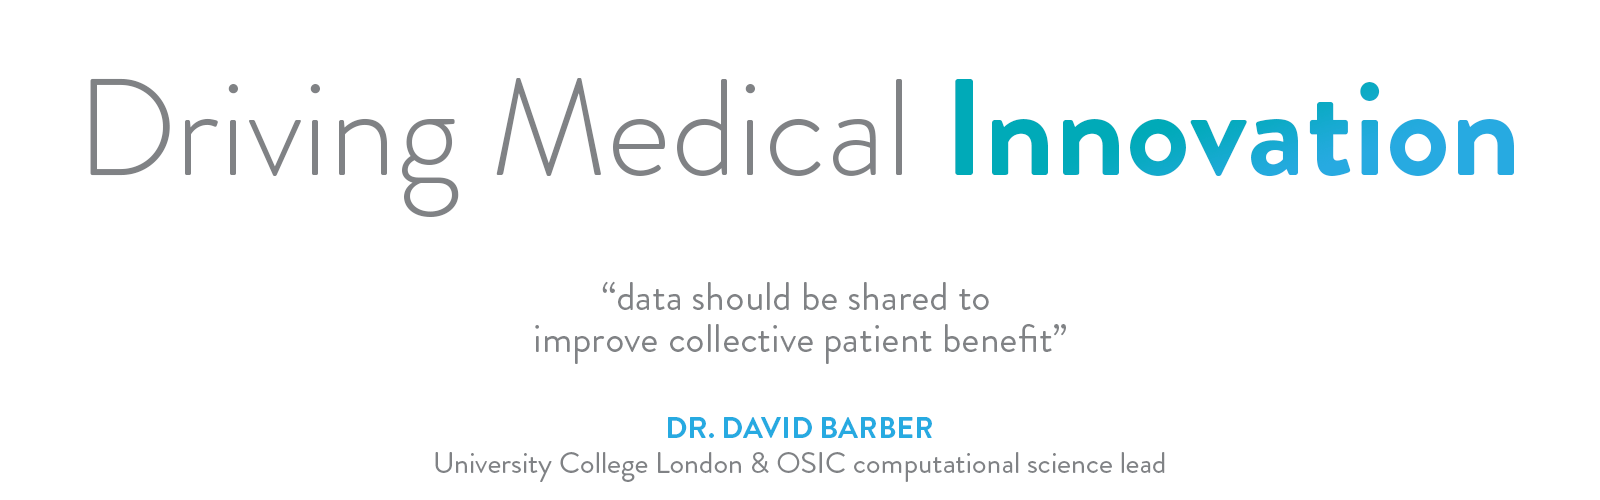 Driving Medical Innovation: Quote by Dr. David Barber, University College London & OSIC computational science lead, 